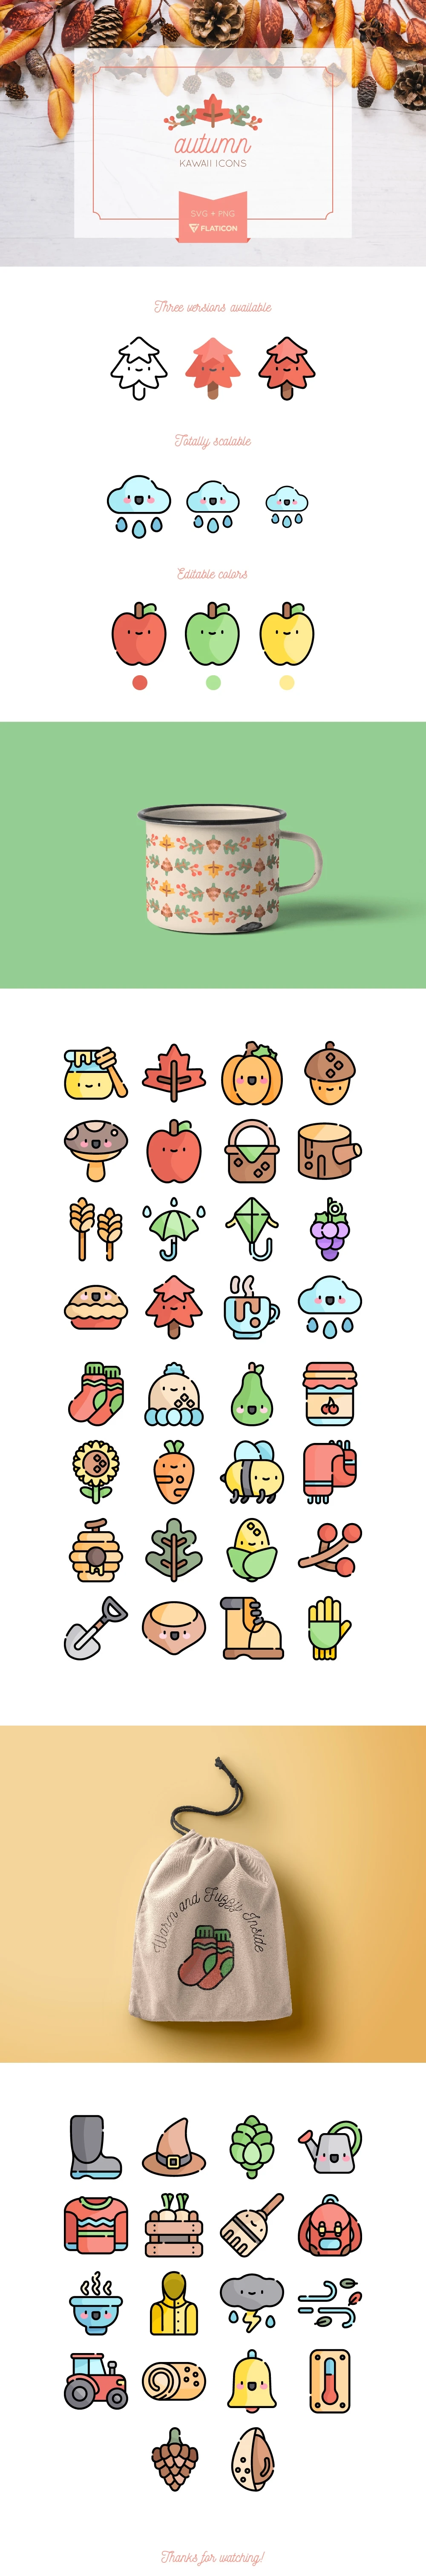 Autumn Kawaii Icon Set - In total there are 50 icons in the set and are available in both SVG and PNG formats. They’re all editable, scabale, and come in a choice of flat, line or colored line styles